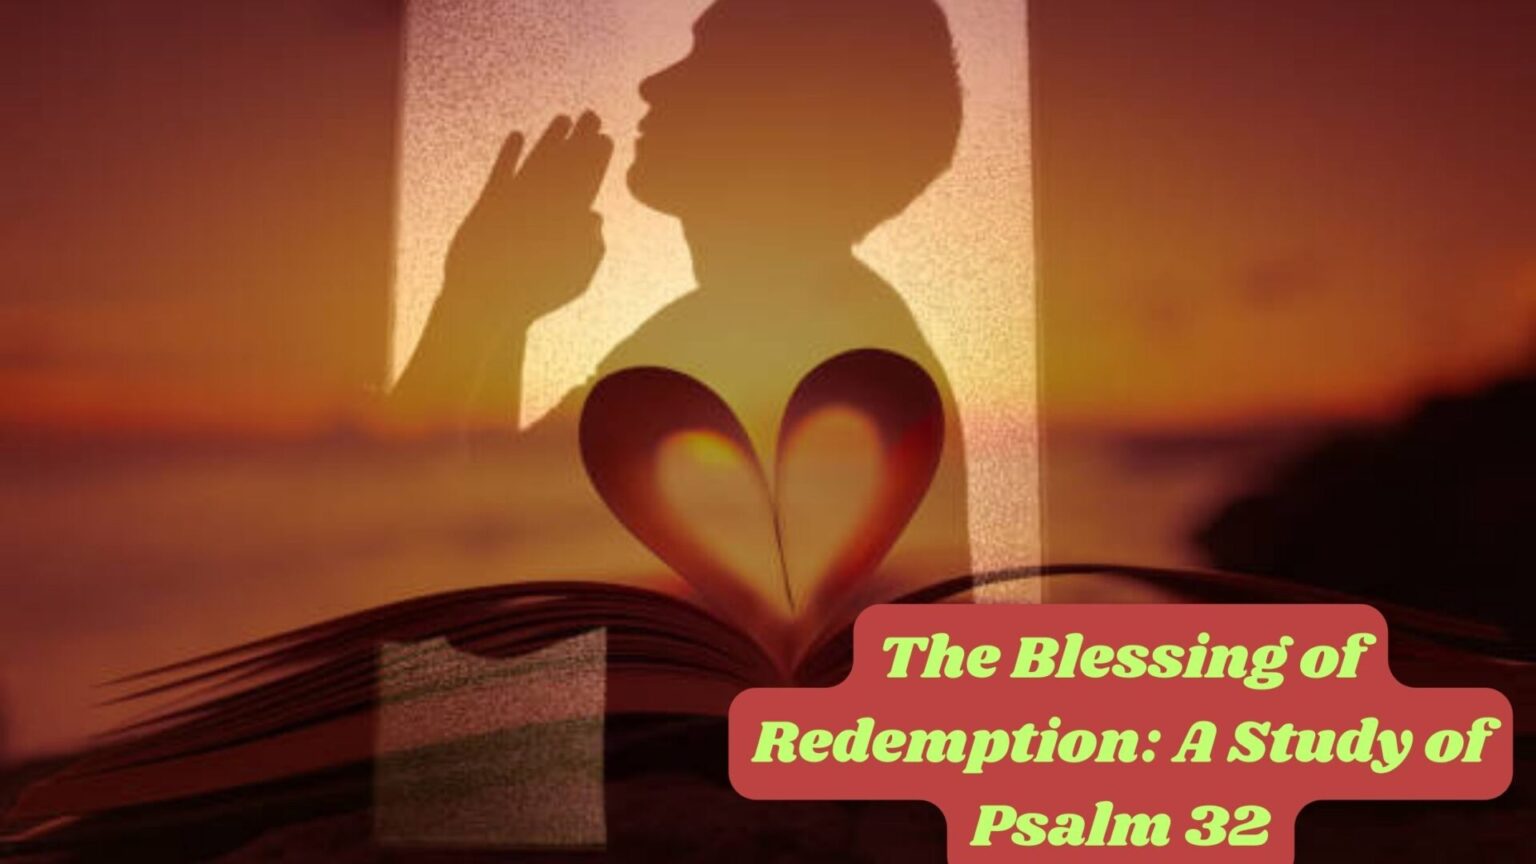 A Study of Psalm 32: The Blessing of Redemption